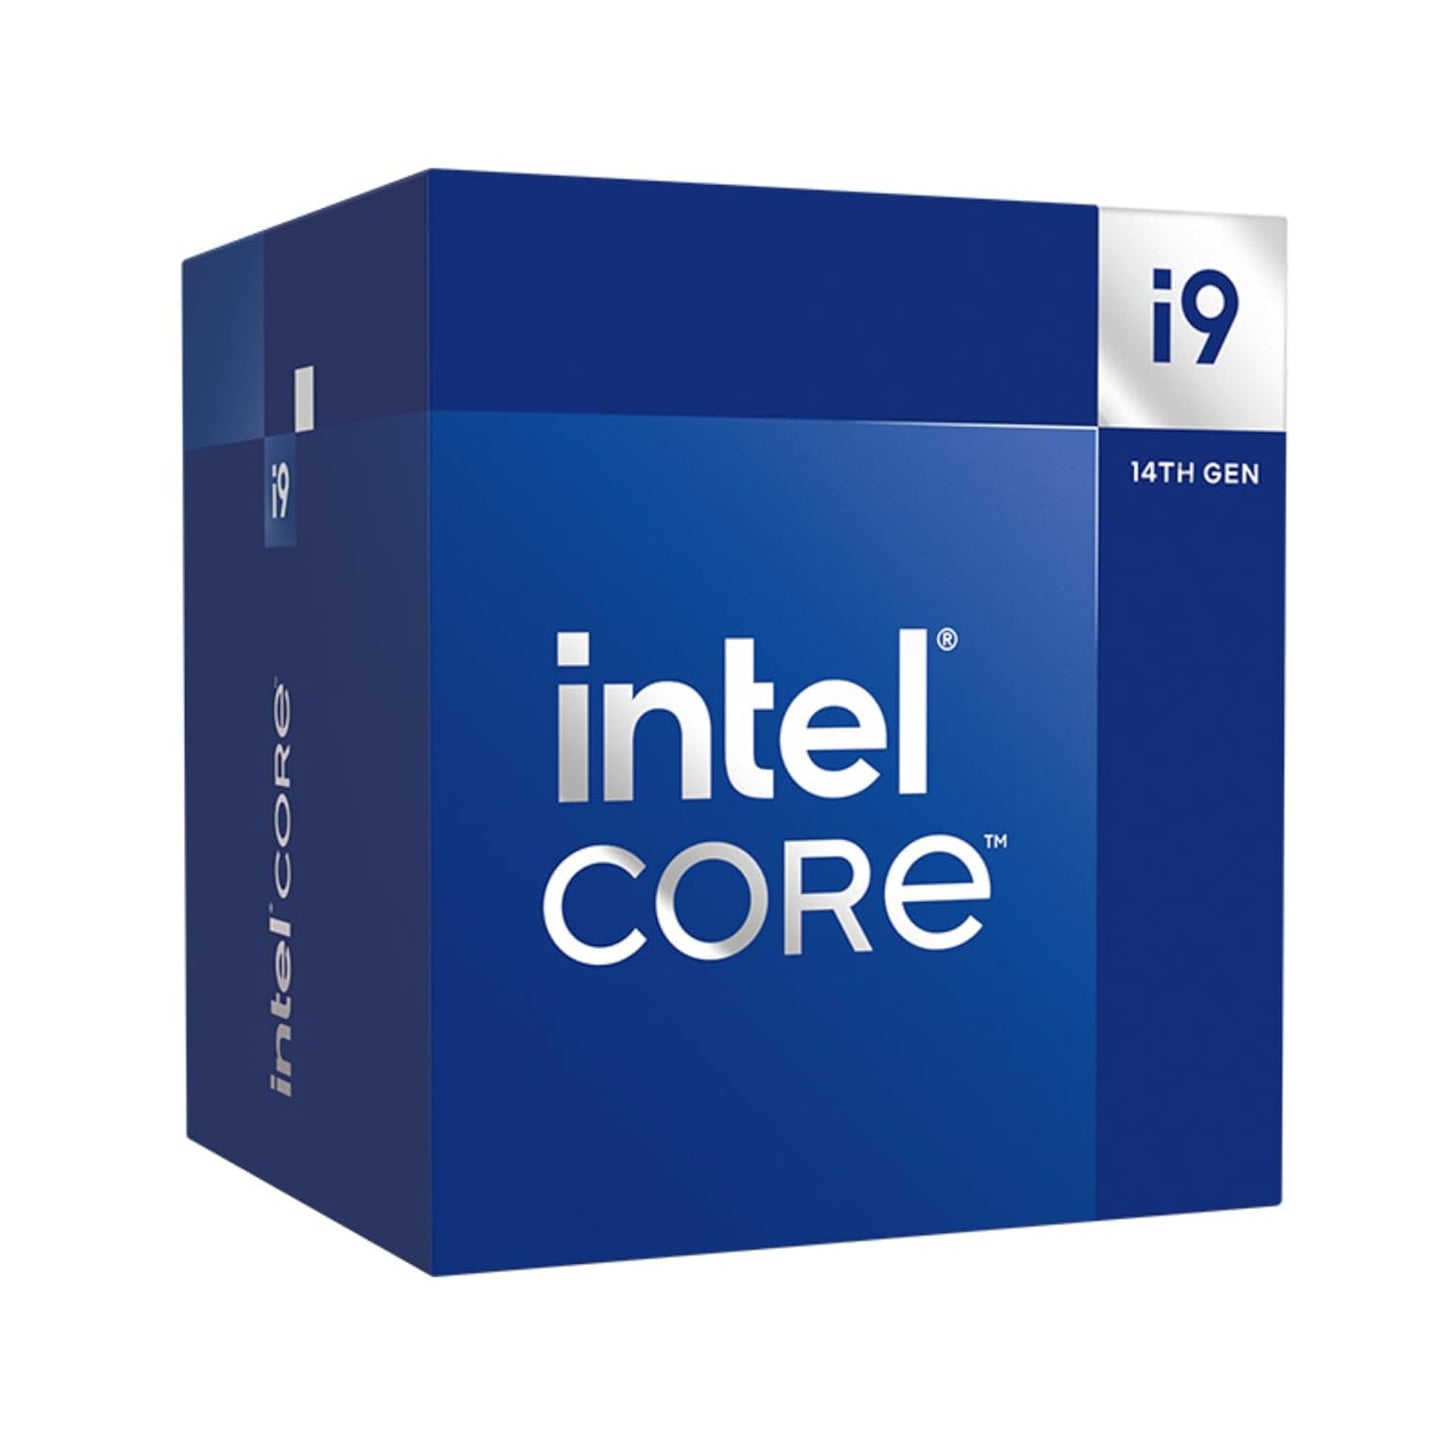 Intel Core i9-14900 Processor, 24 Cores, 32 Threads, 5.8 GHz Max Frequency, DDR5, 5.0 PCI Express Lanes, UHD Graphics 770